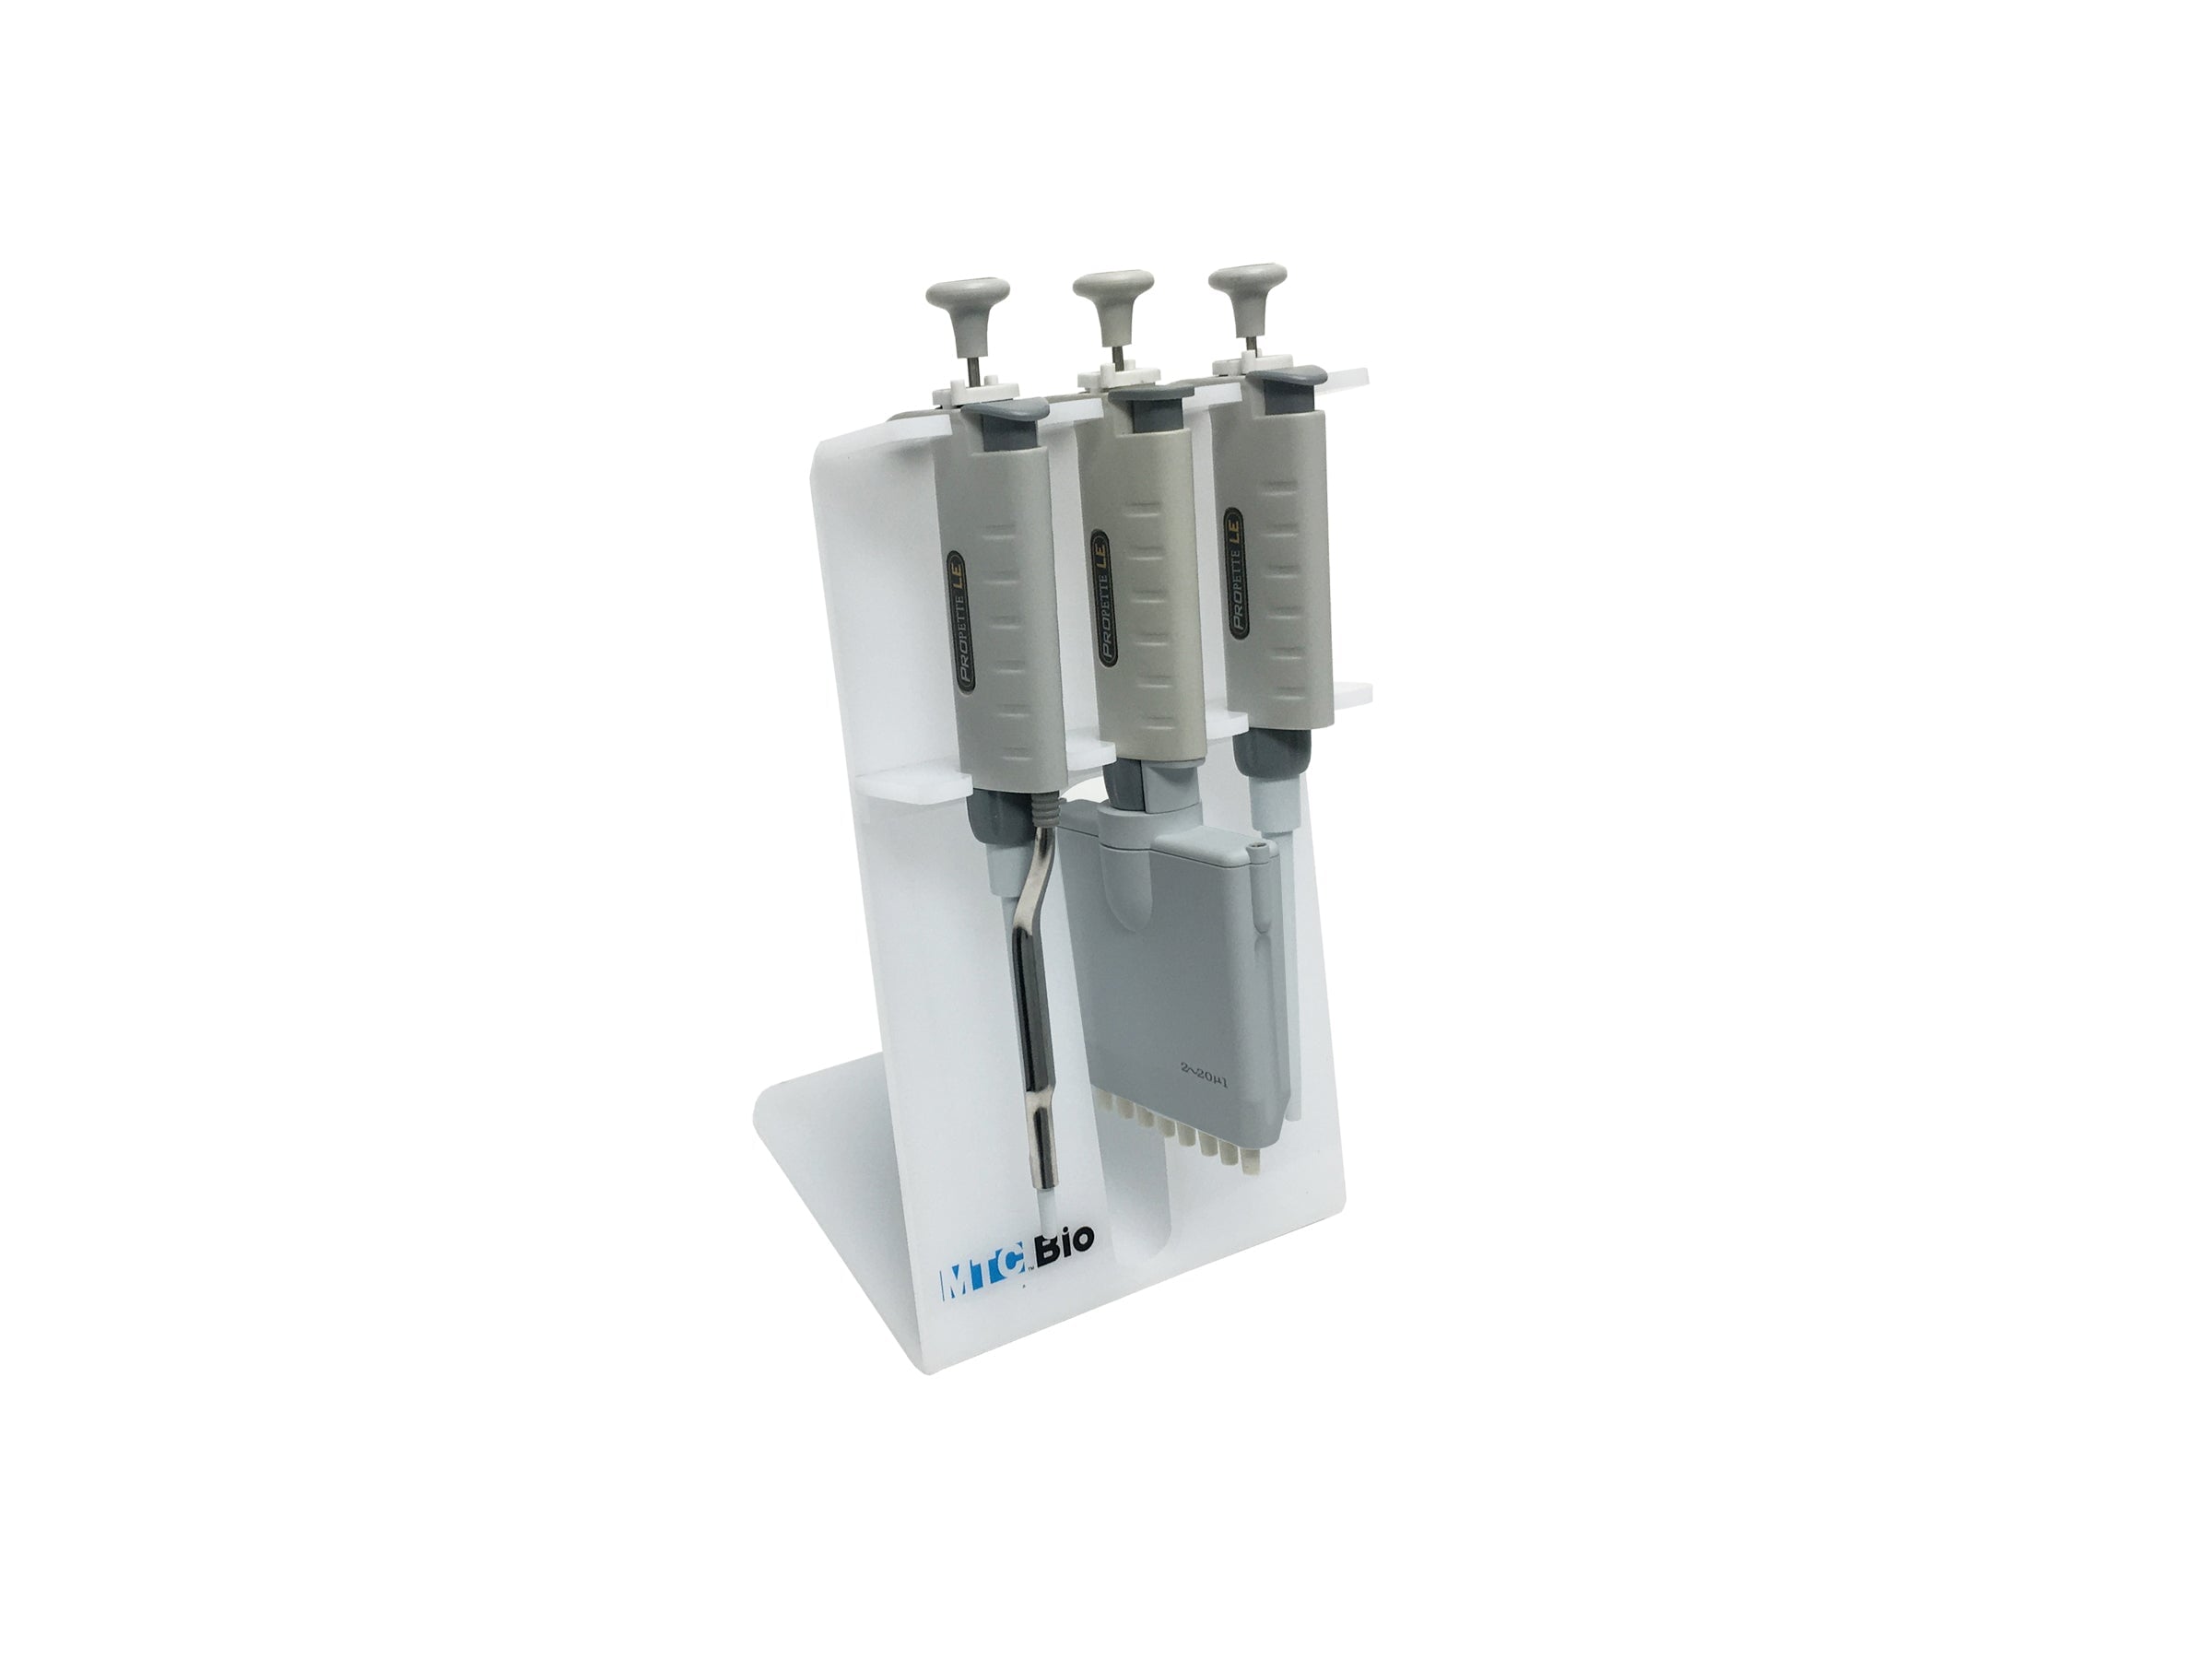 MTC Bio P4403 SureStand™ Pipette Stand for 3 pipettes, up to one multi-channel, acrylic